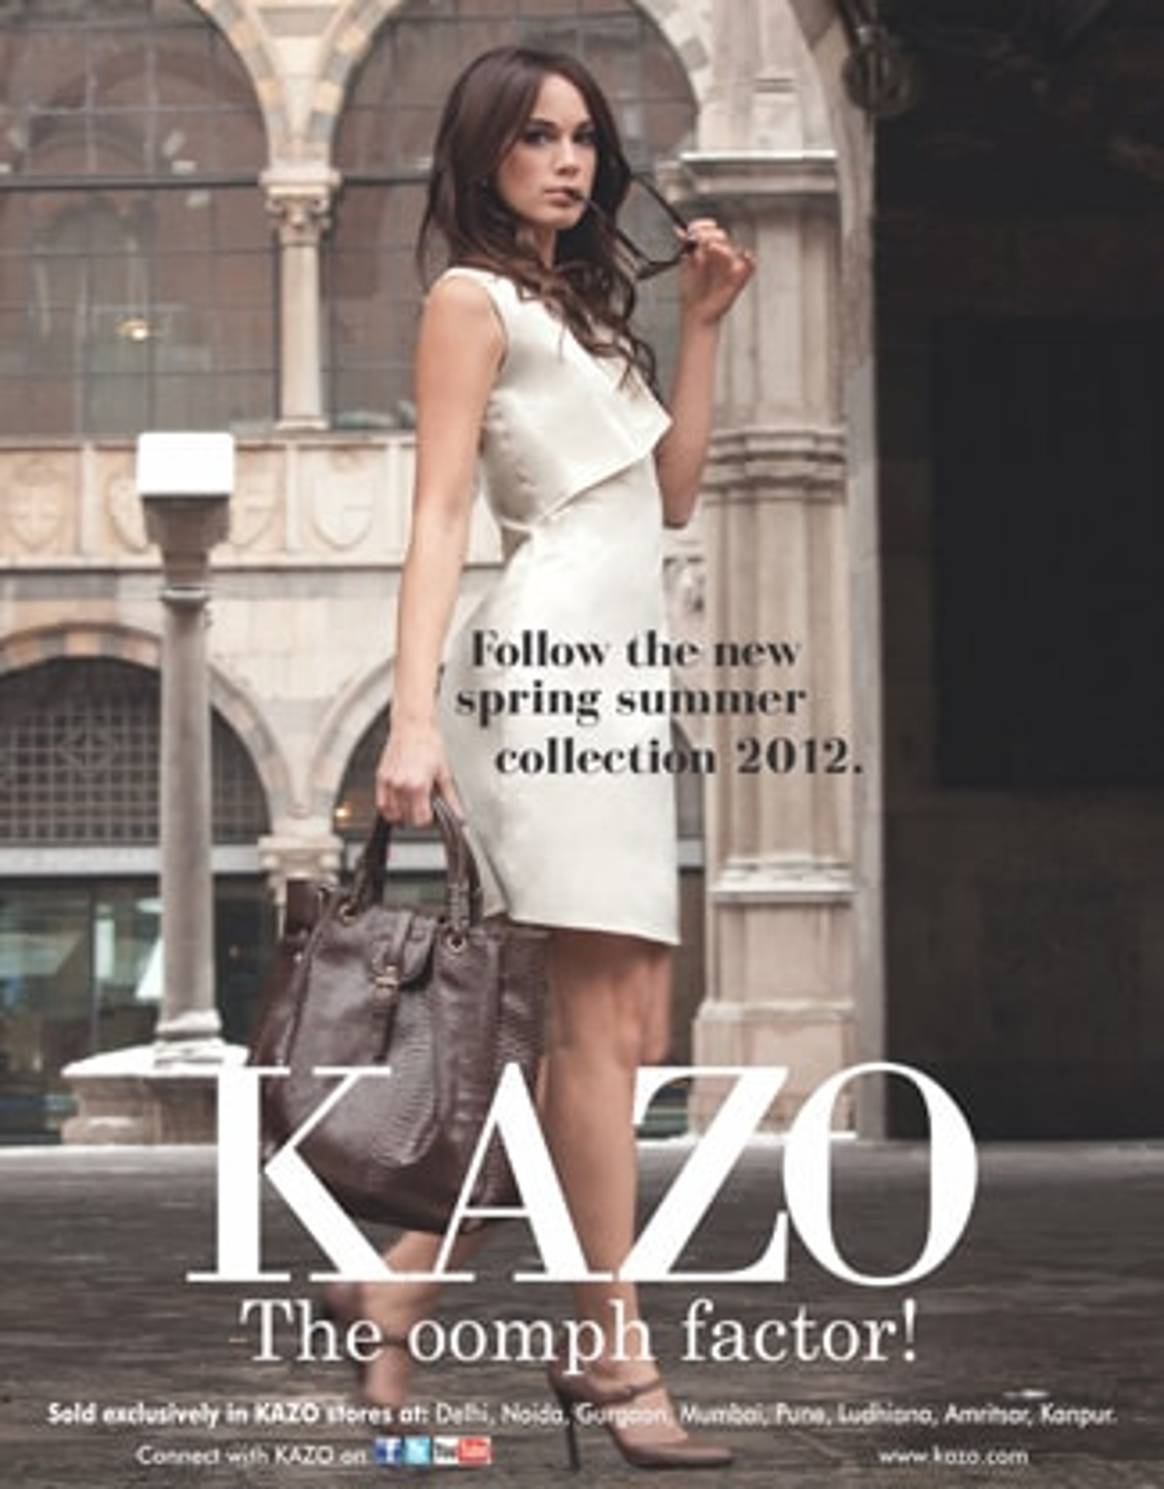 Kazo to venture into Europe, increase store count